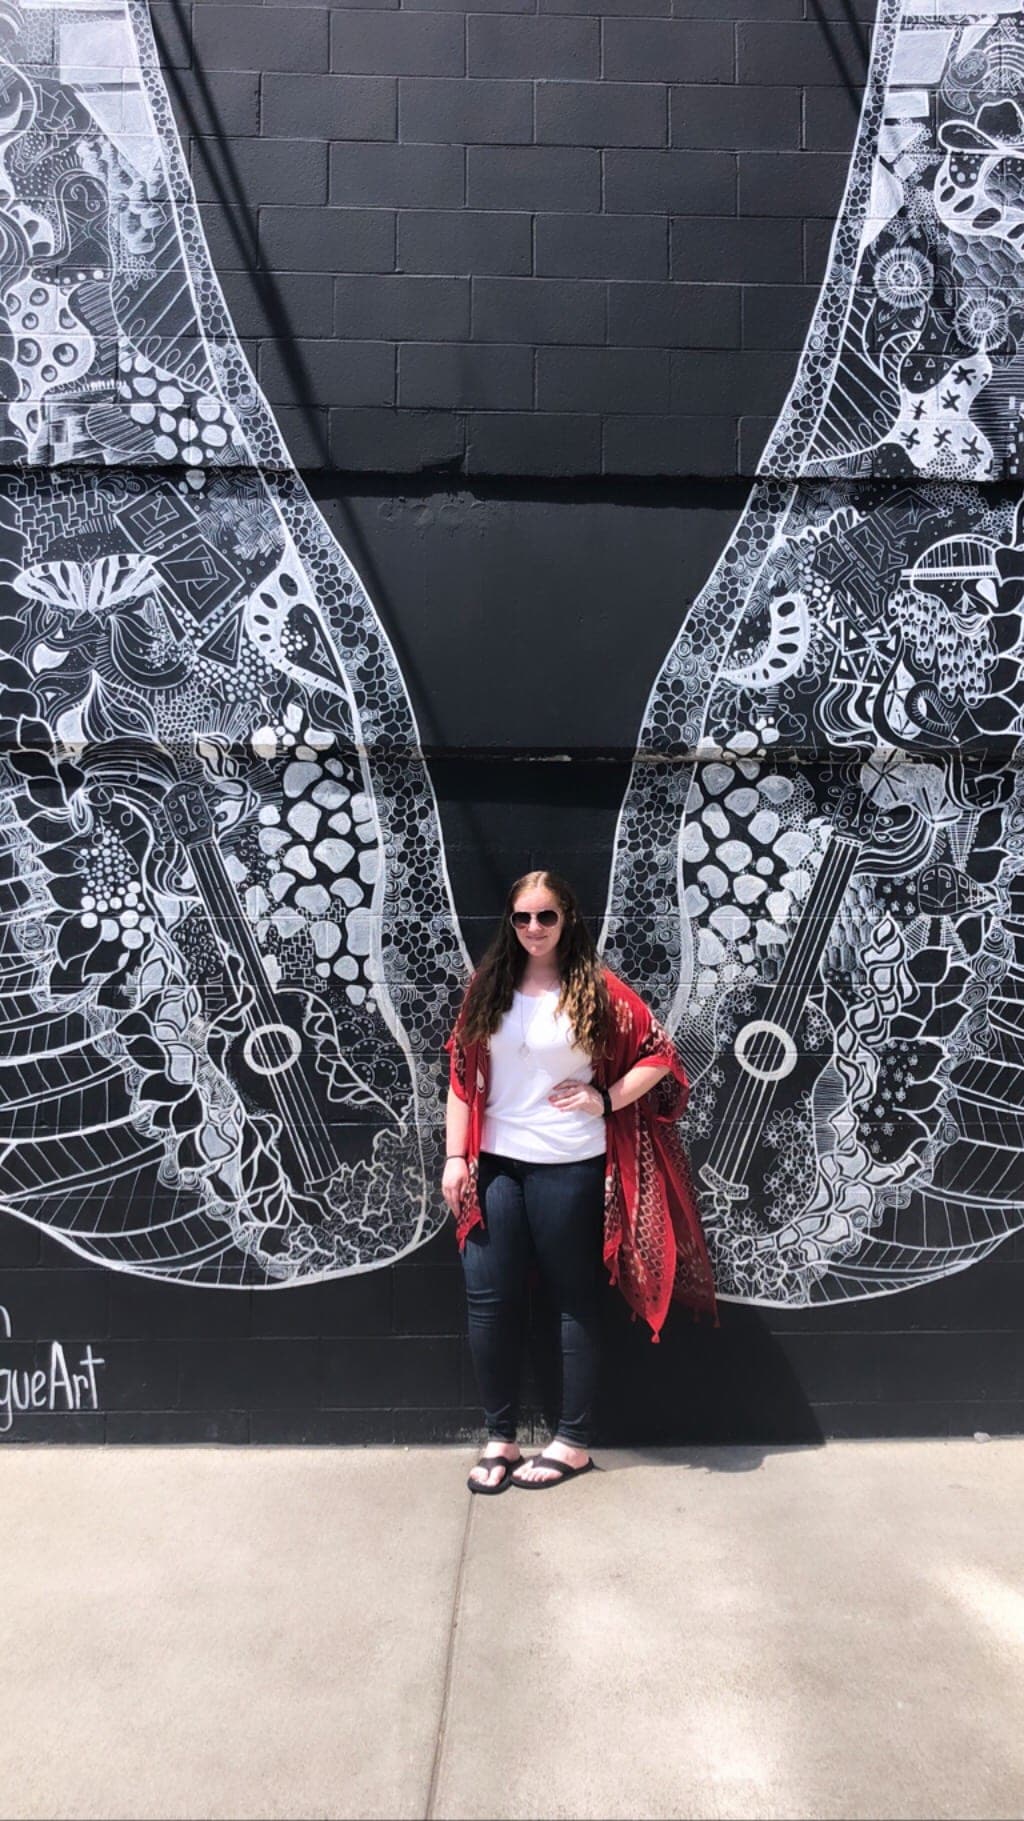 Michelle Frohman, author of the Acorn Hill Home Blog at the Nashville WhatLiftsYou Wings Mural
